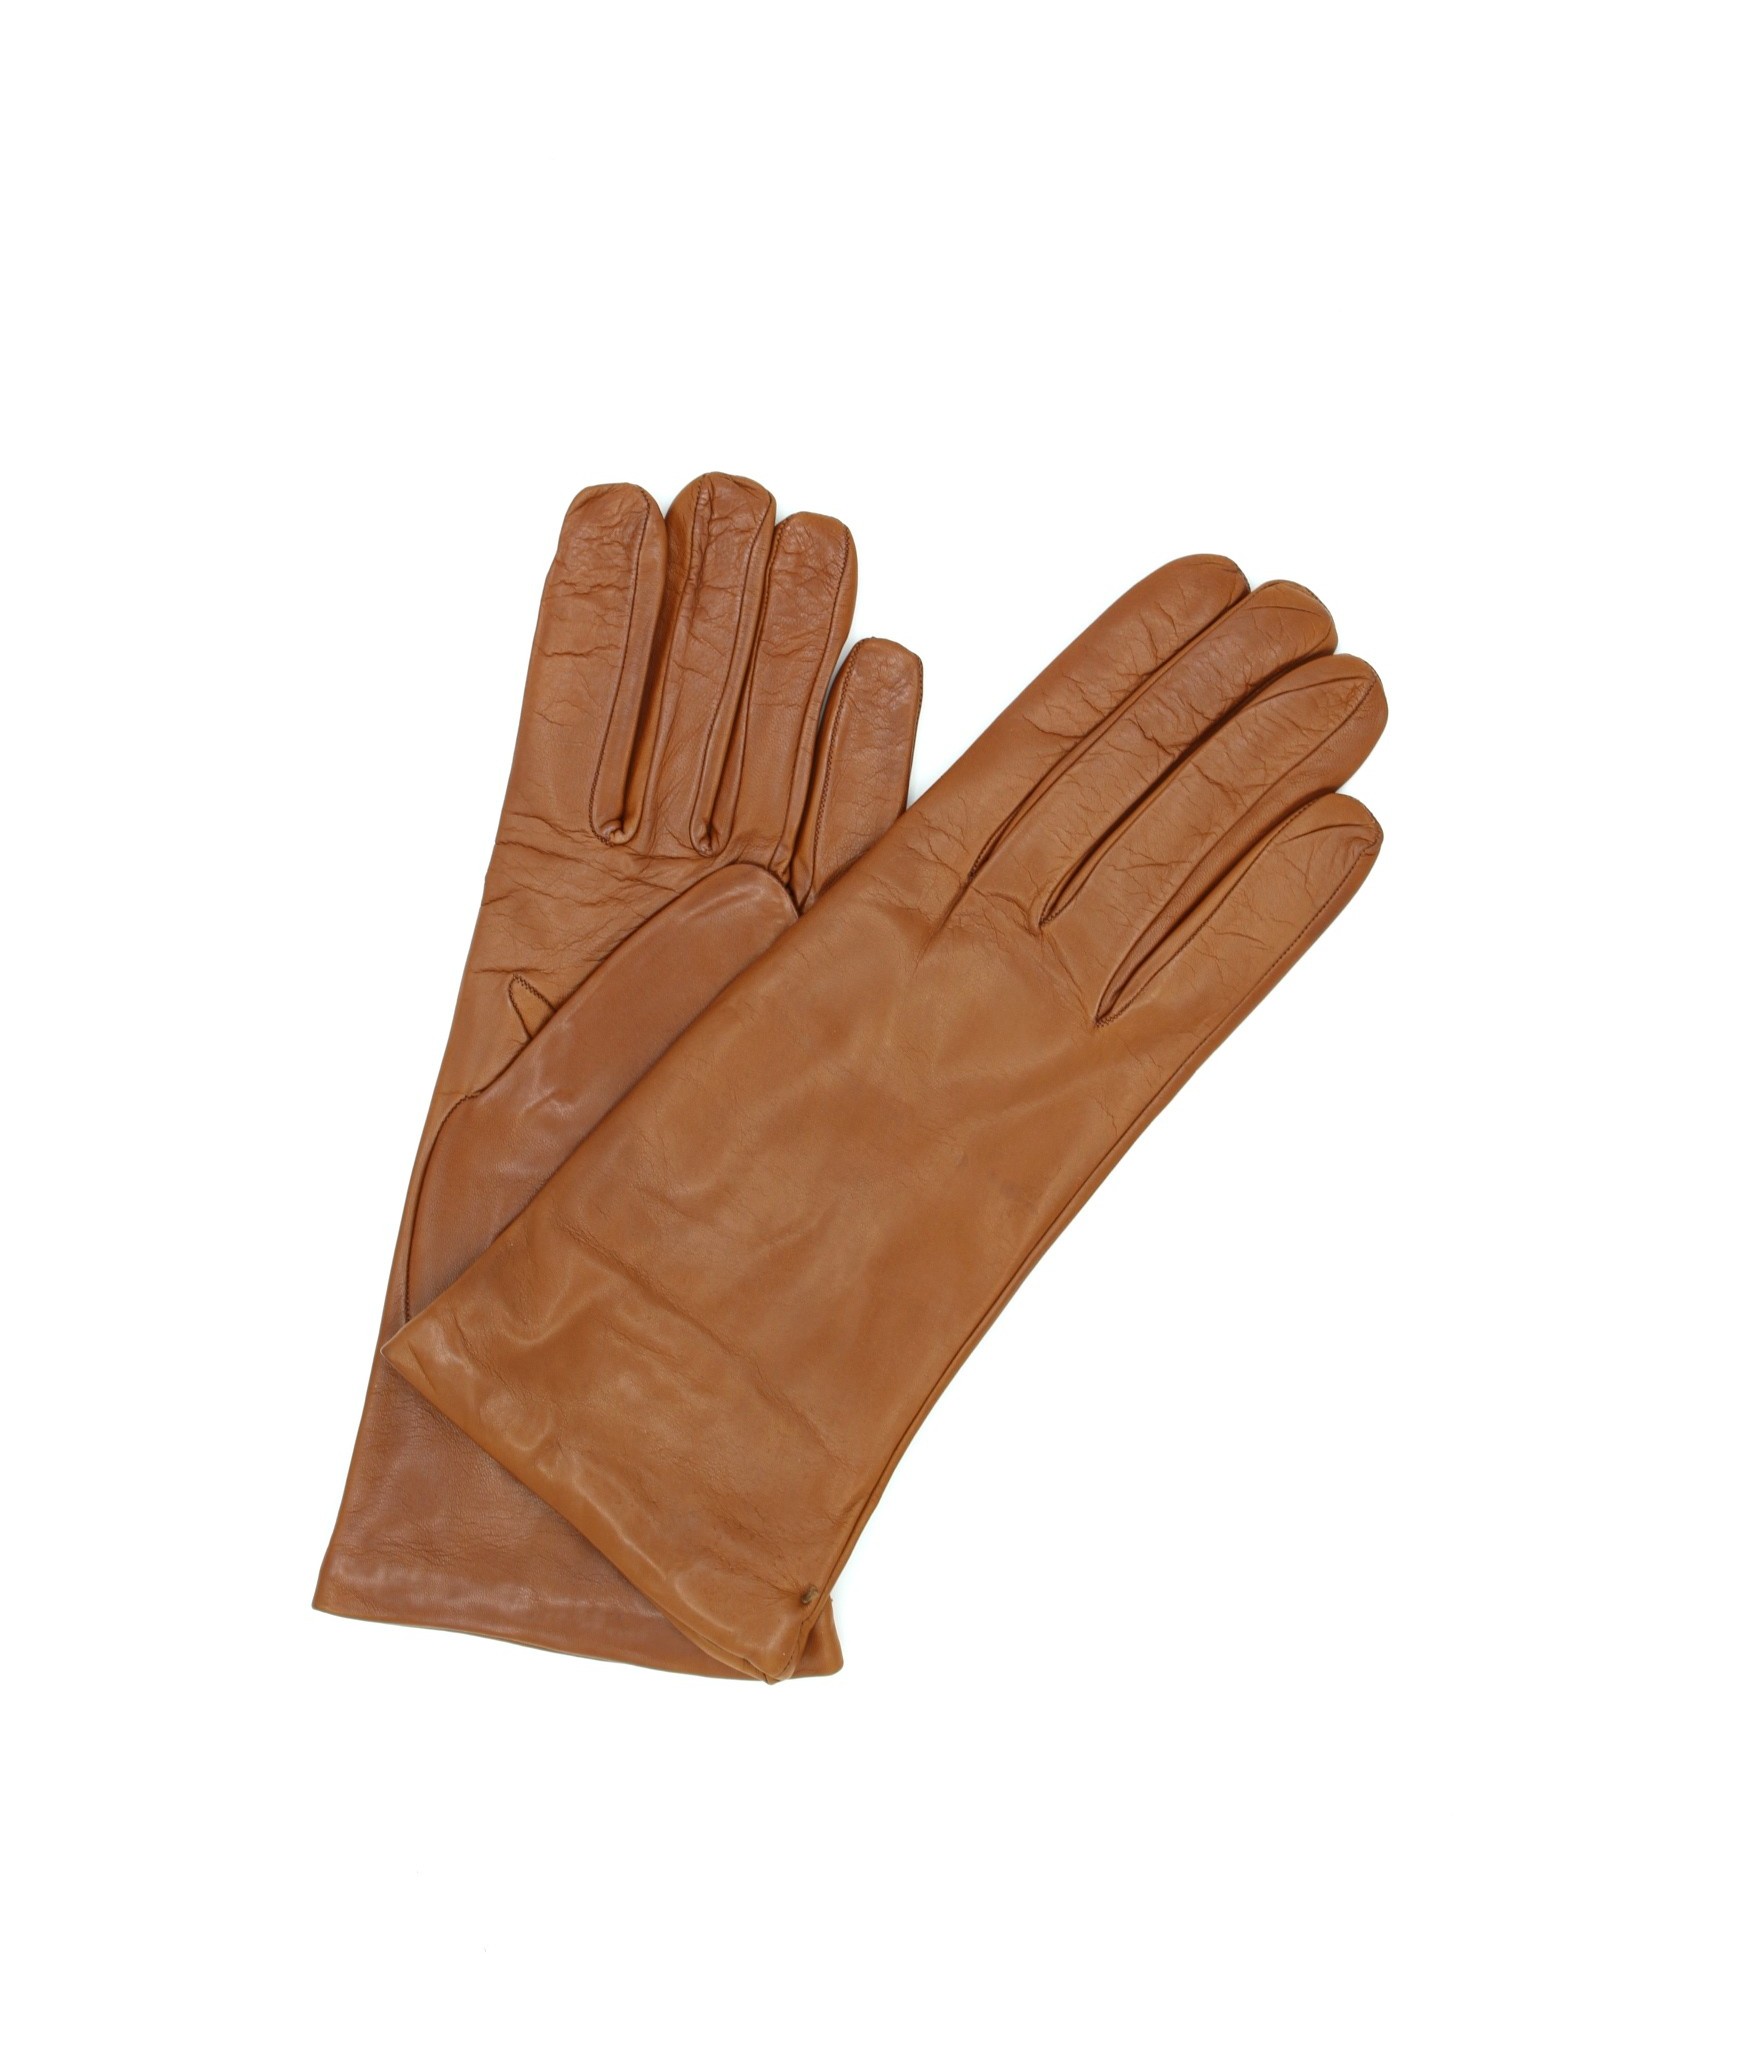 1011 Classic Kid Leather Gloves Cashmere Lined Tan 